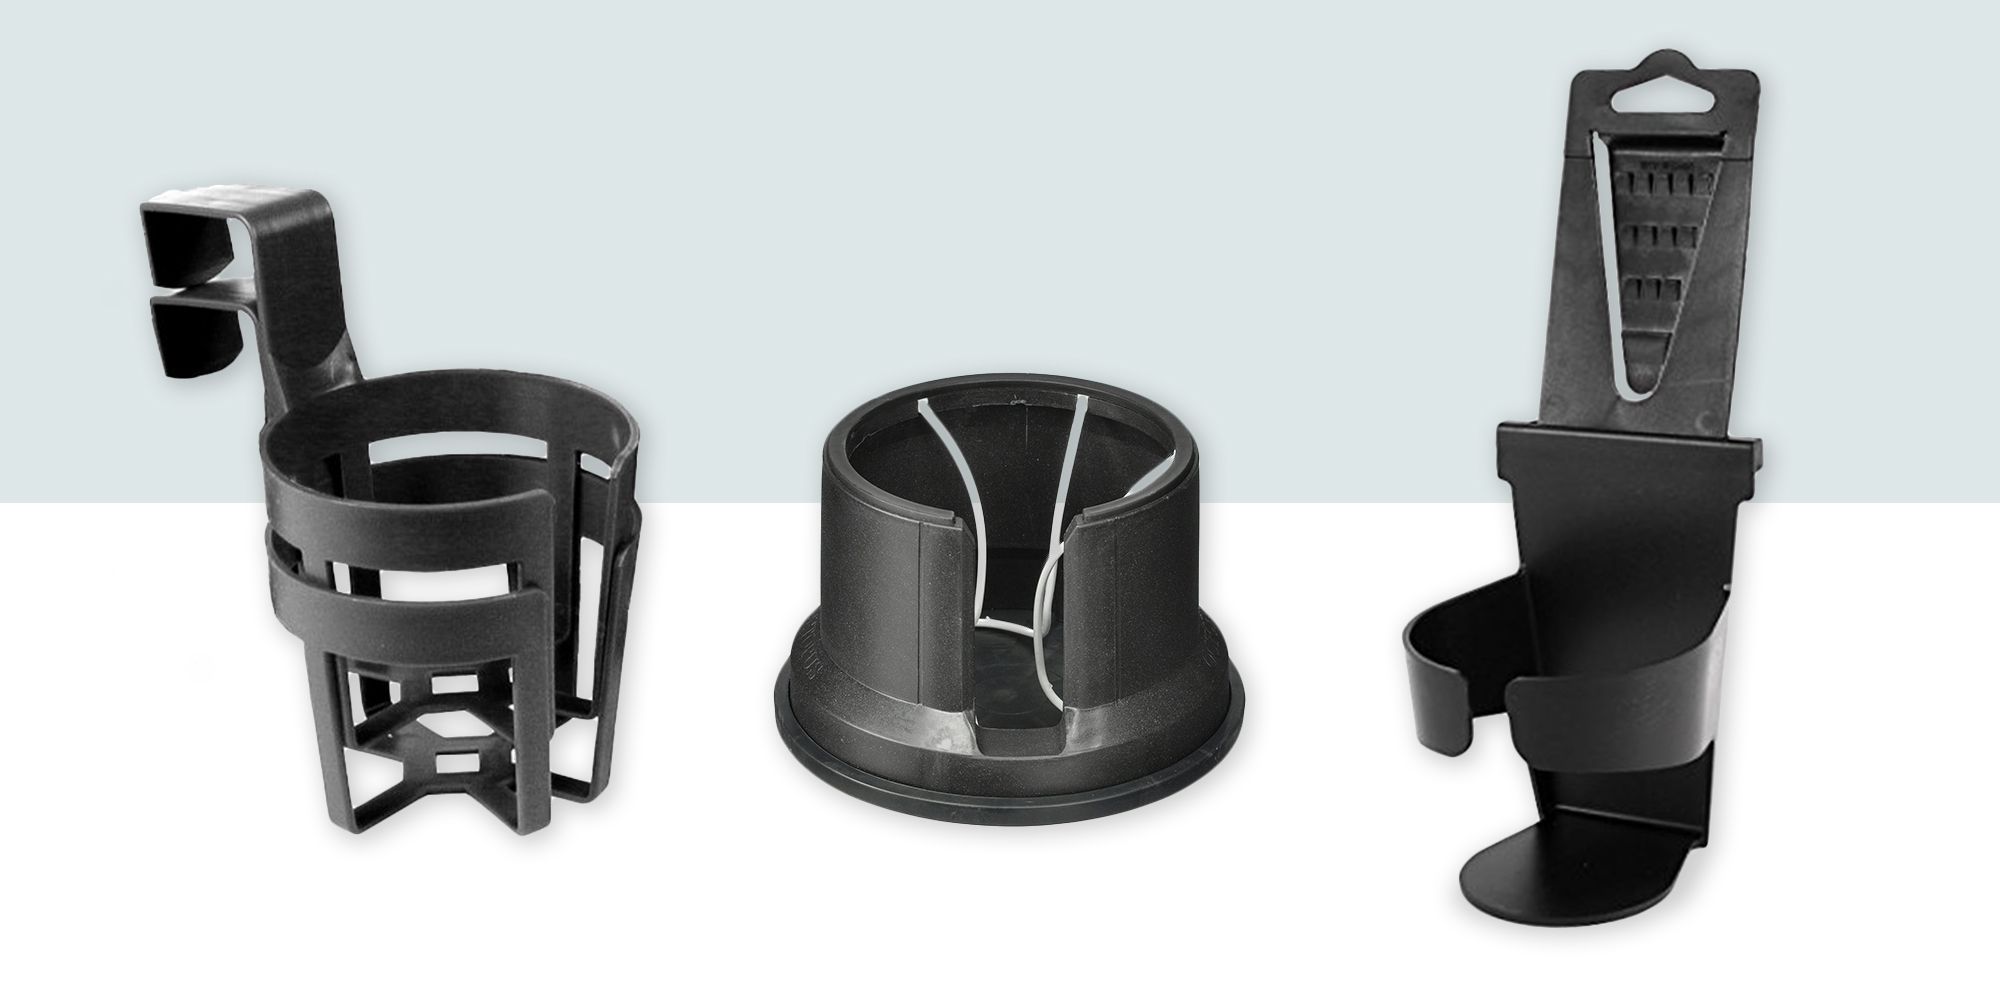 7 Best Car Cup Holders in 2018 - Coffee Cup Holders for Your Vehicle